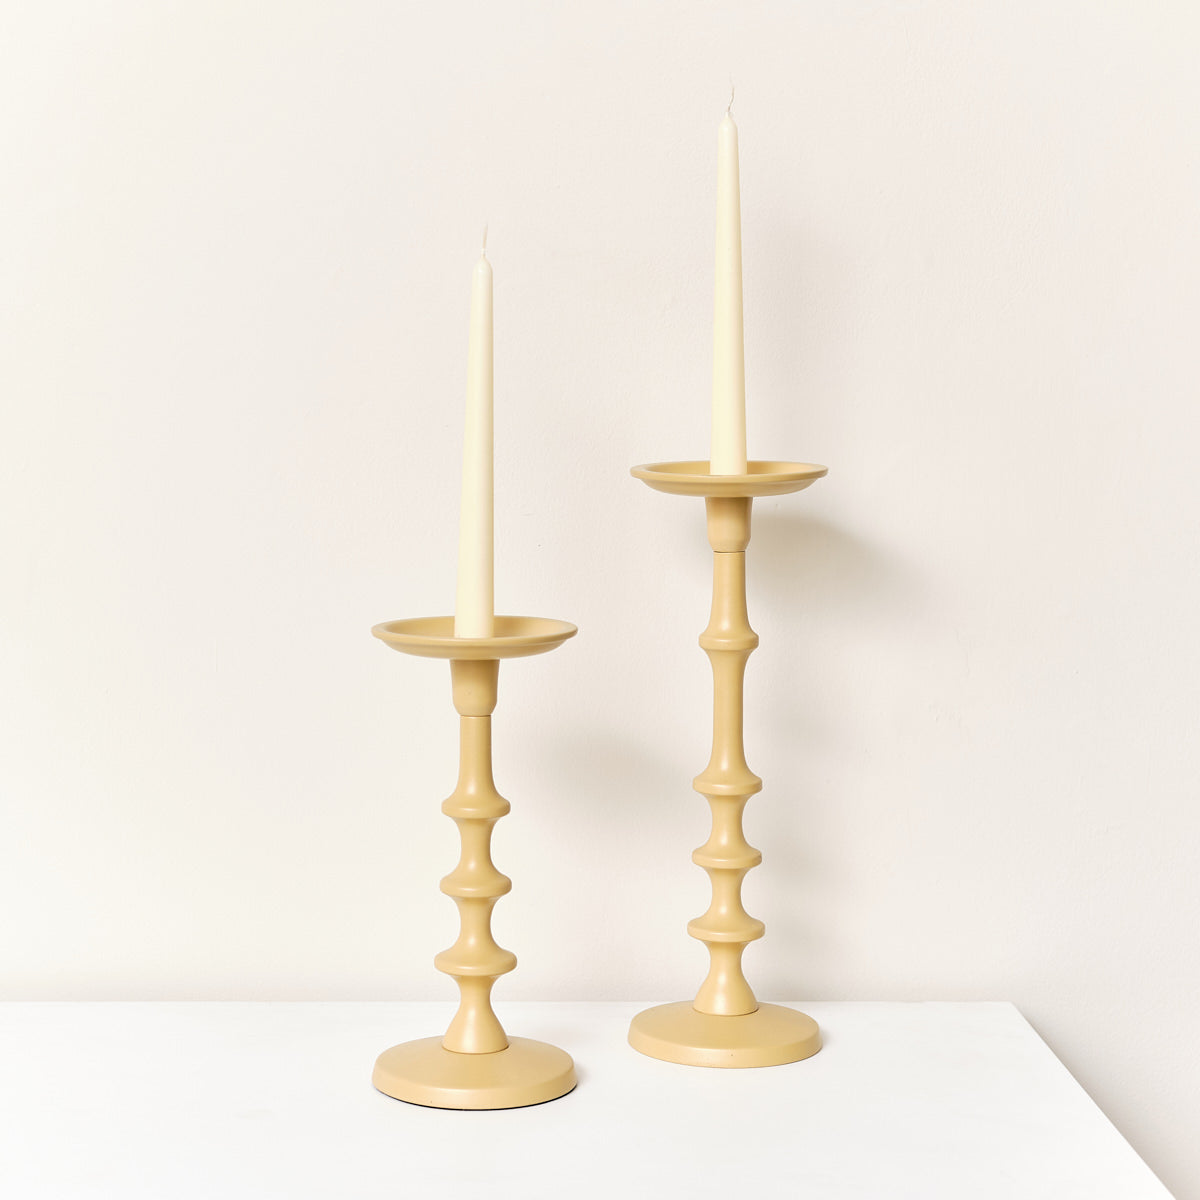 Set of 2 Mustard Yellow Candle Holders